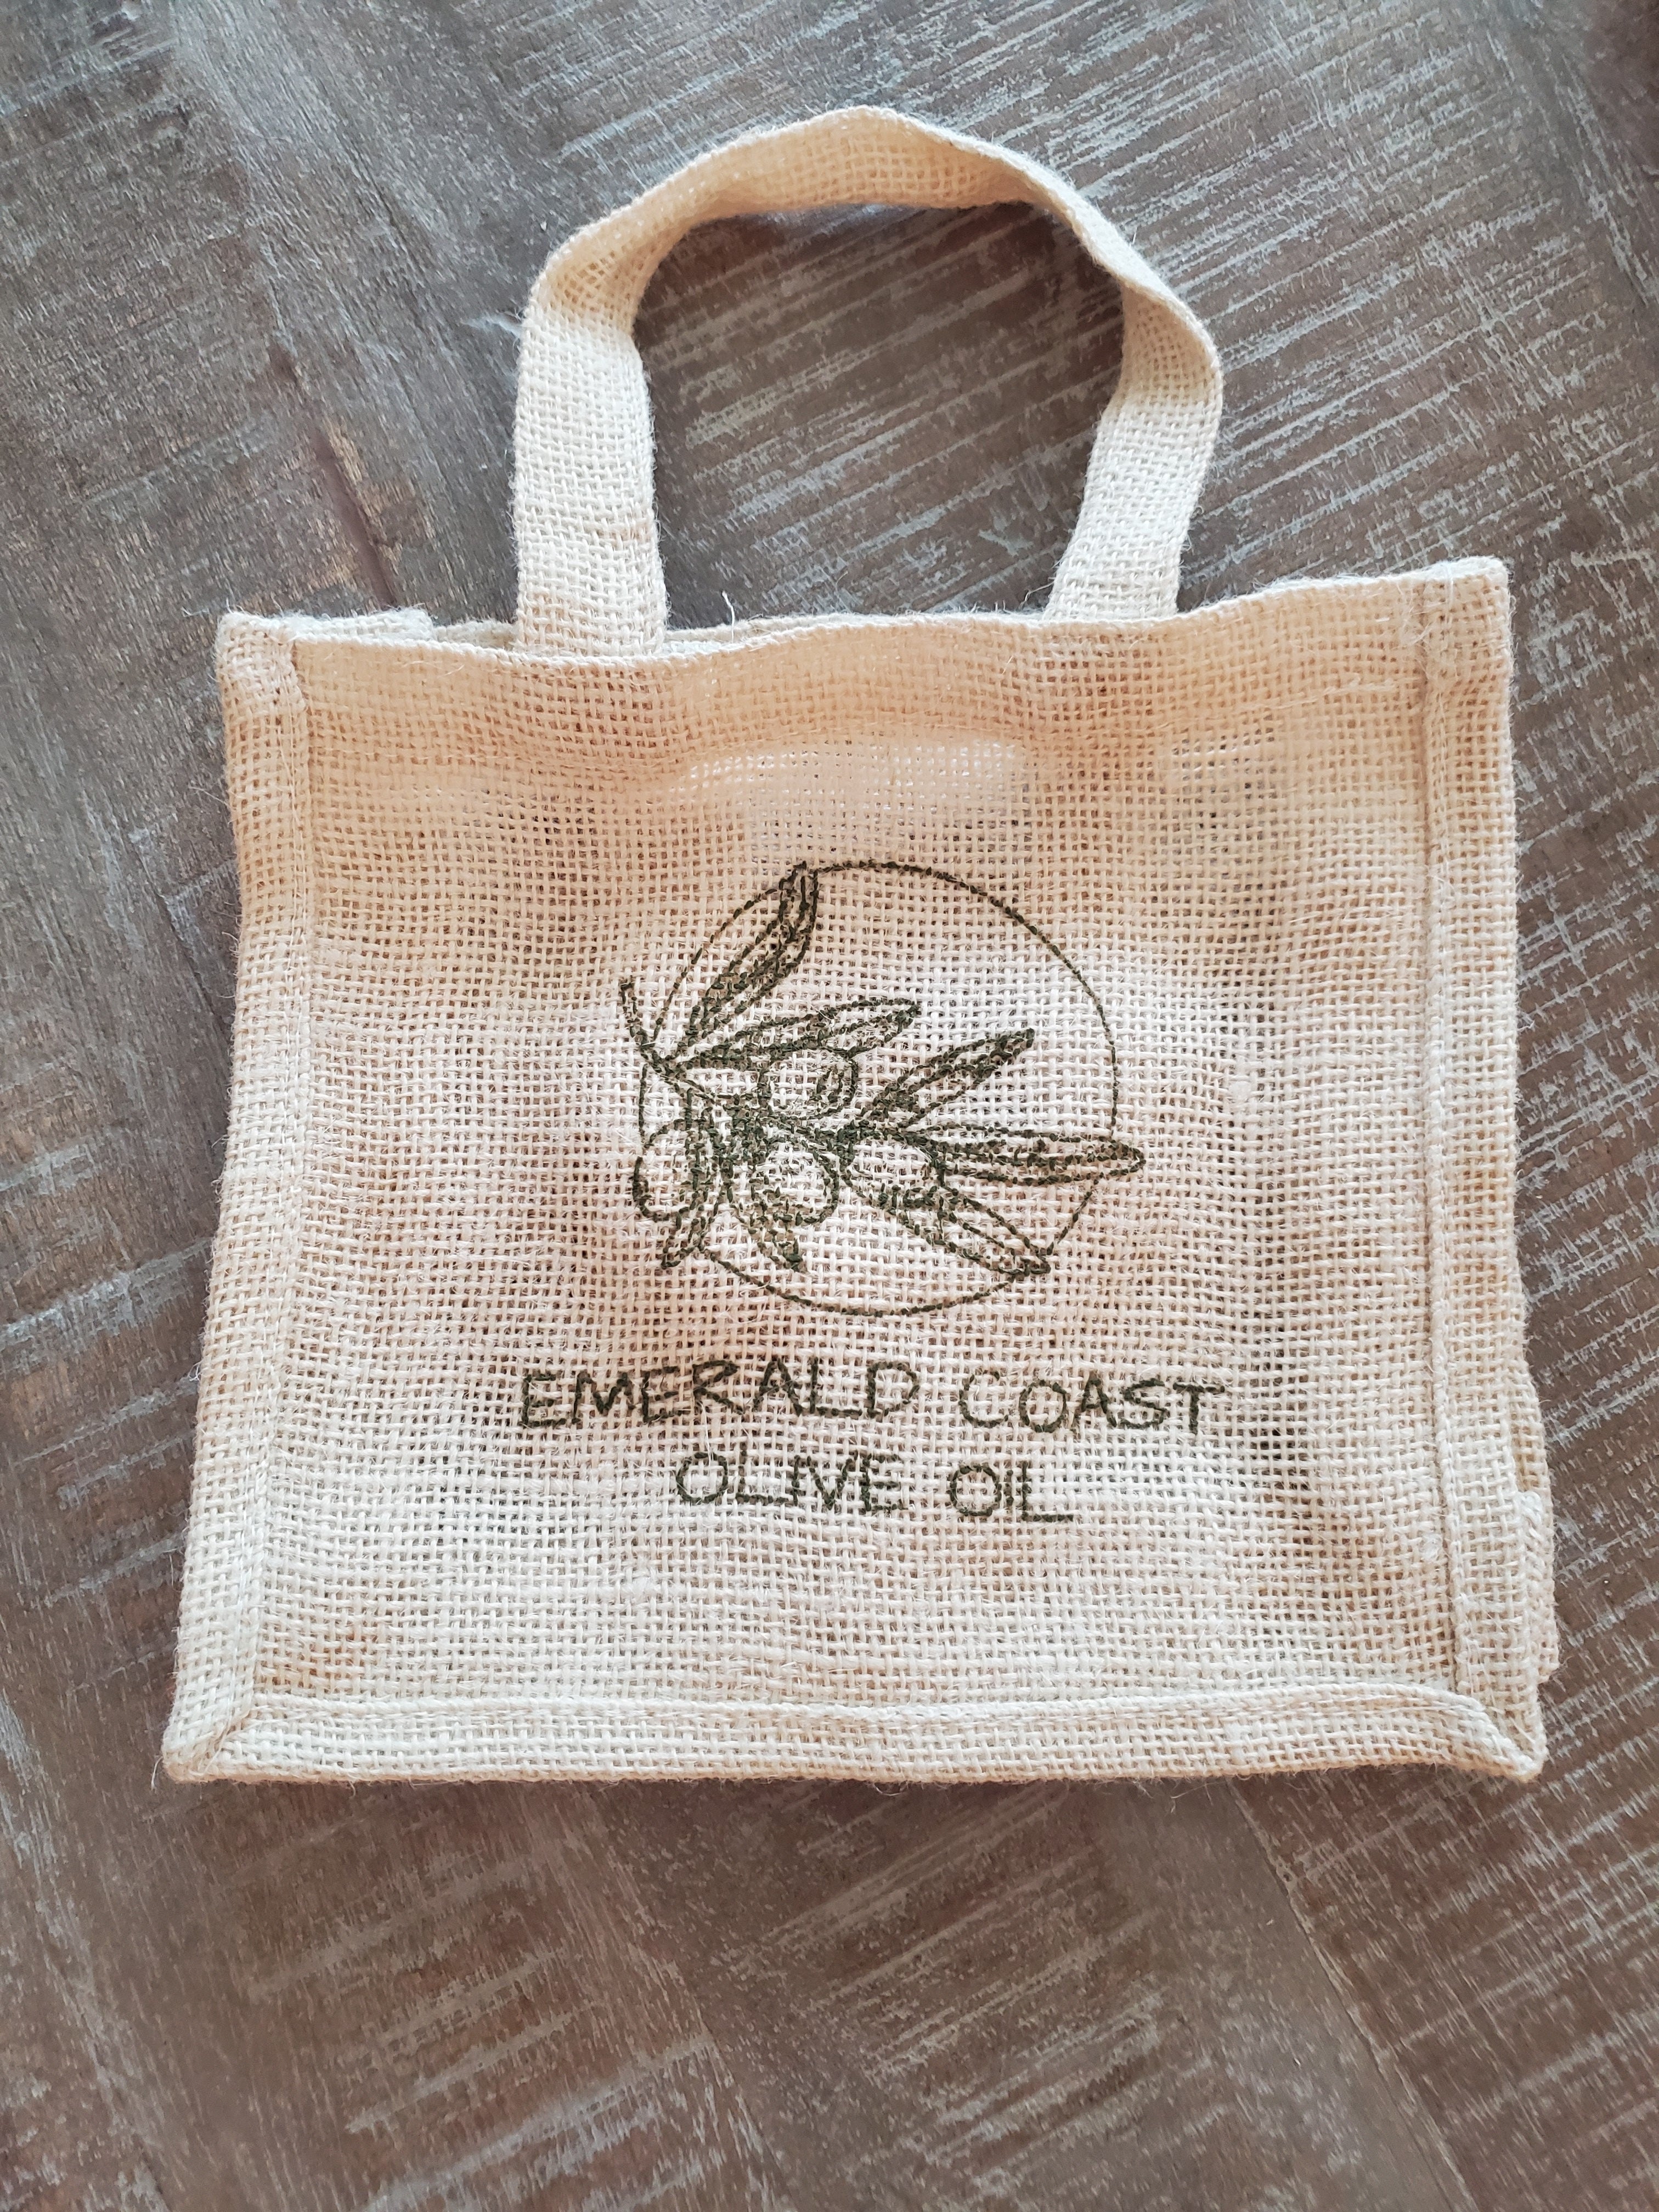 Top Reasons To Choose Jute Bags Over Plastic Bags: Embrace Sustainable  Living